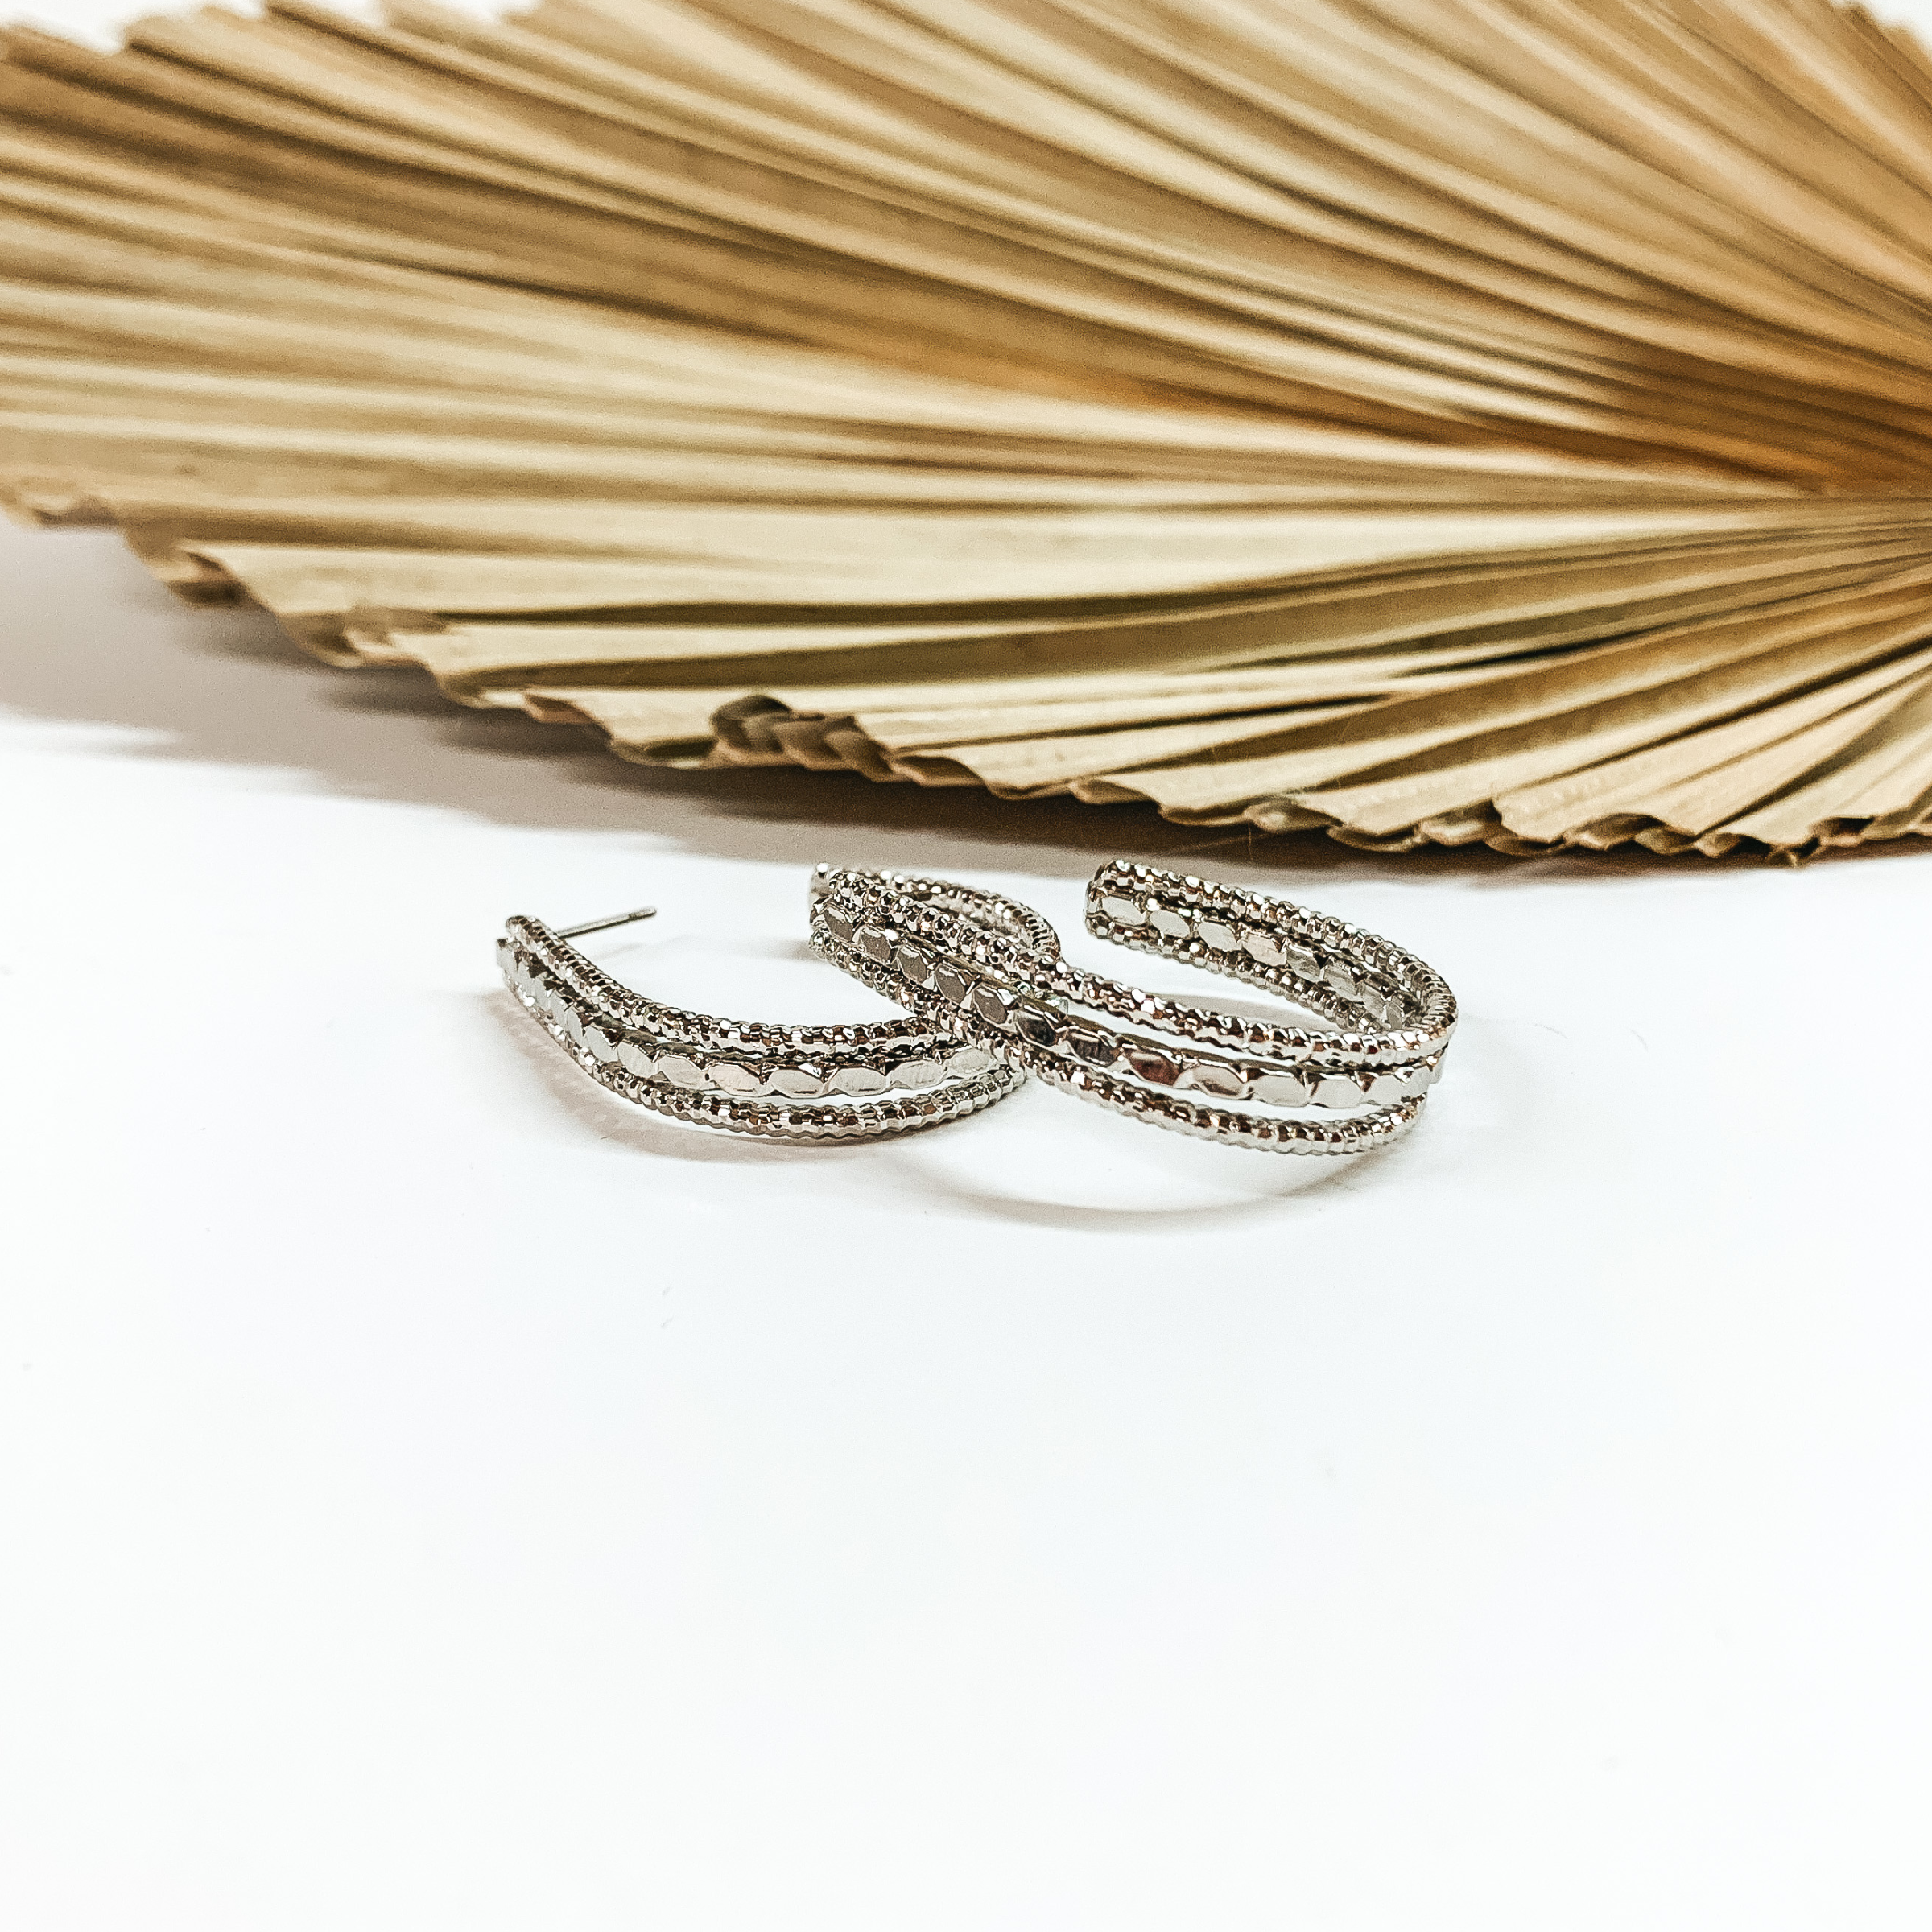 Teardrop, silver hoop earrings with different textures. These earrings are pictured in front a sage green leaf on a white background. 